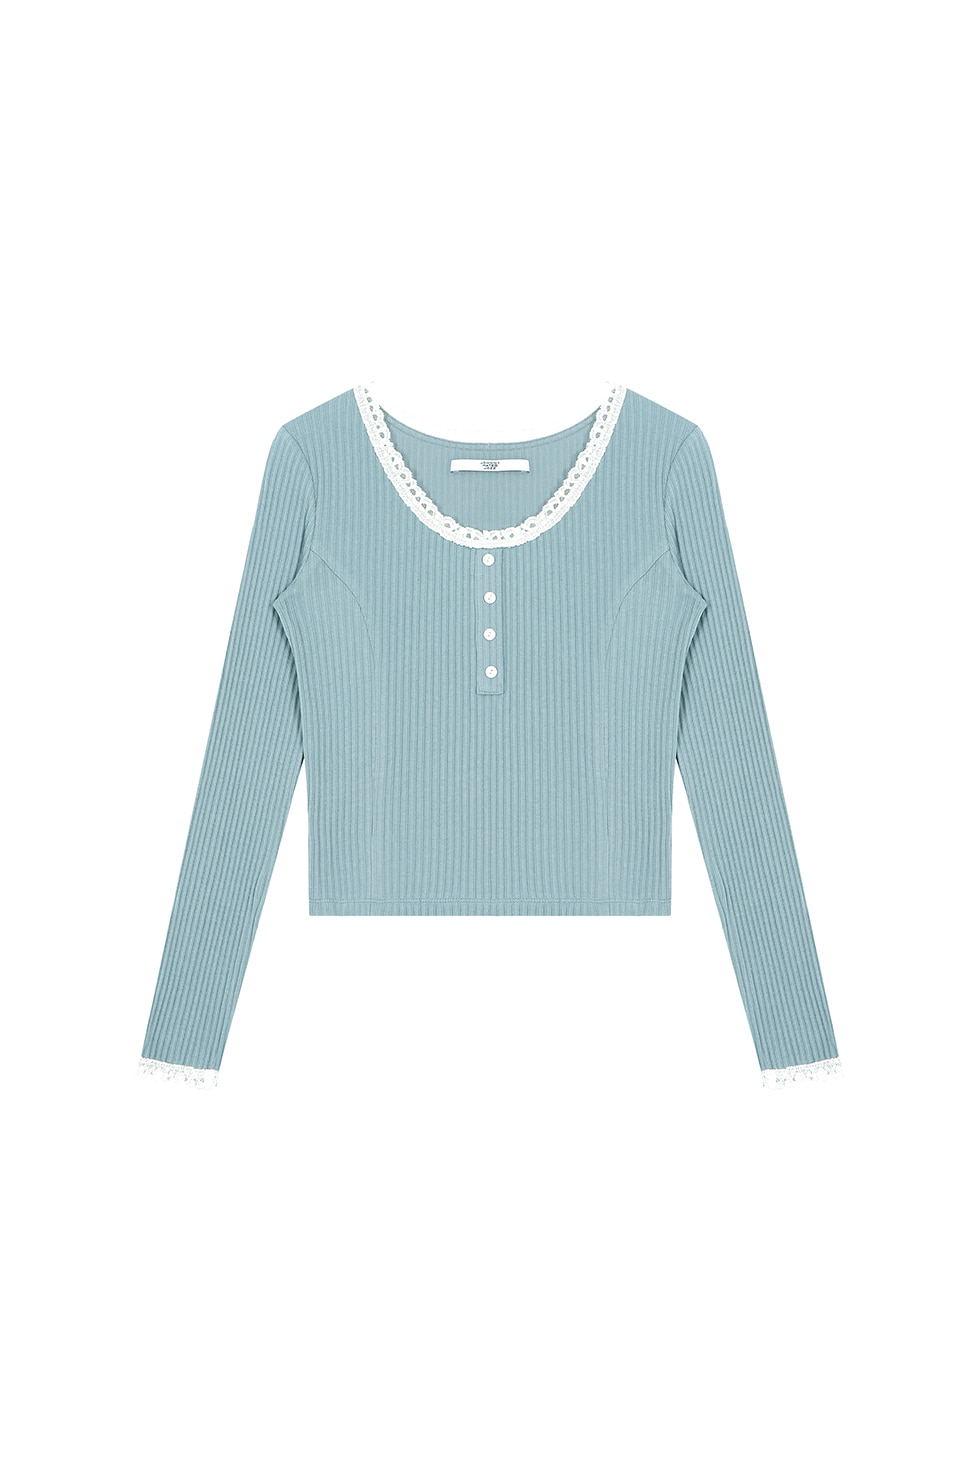 LACE NECK LONG SLEEVES - MINT